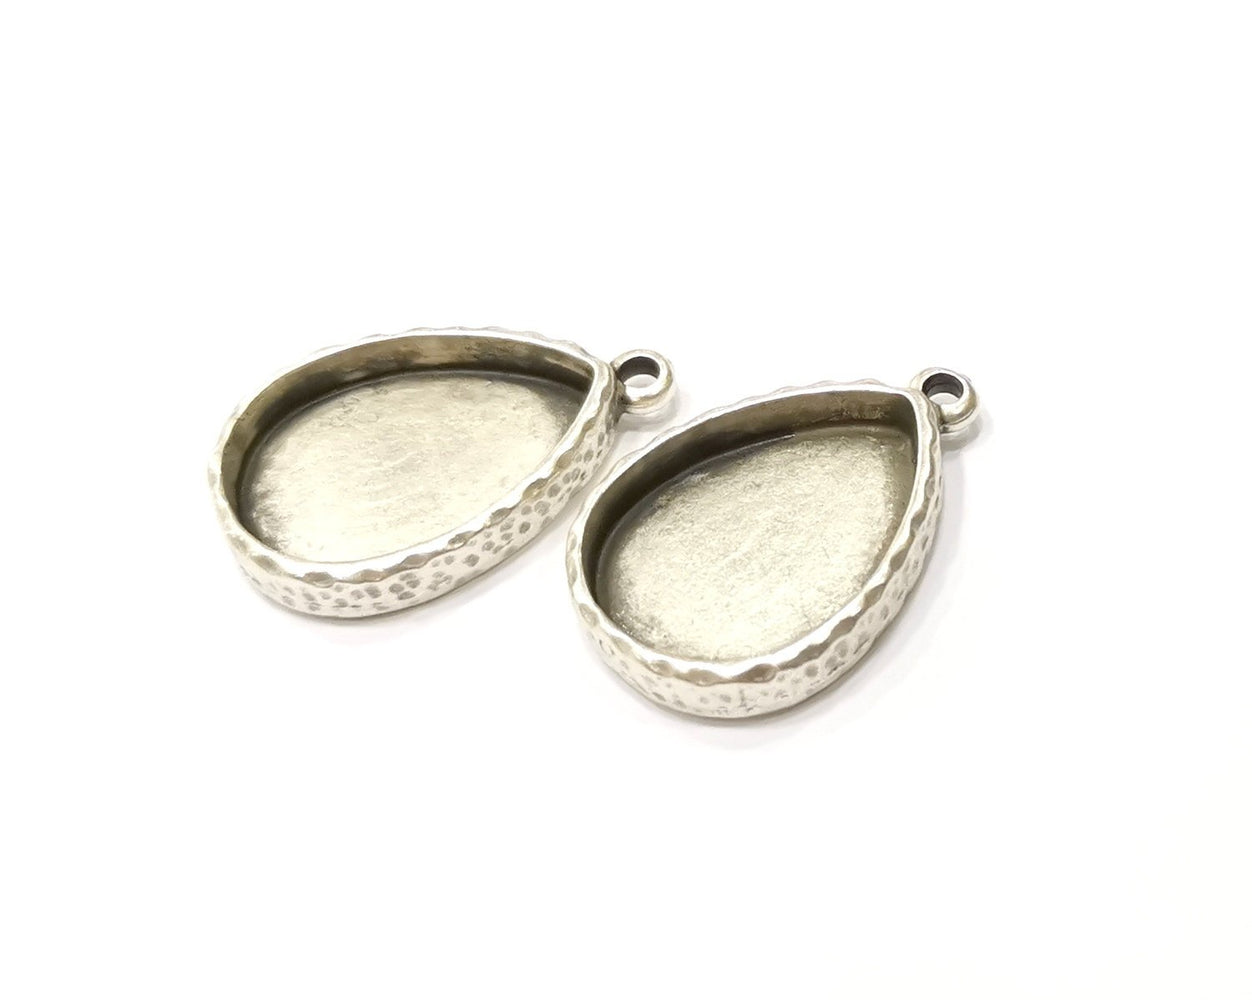 2 Silver Hammered Base Blank inlay Blank Pendant Base Resin Blank Mosaic Mountings Antique Silver Plated Metal (25x18mm blank )  G16792